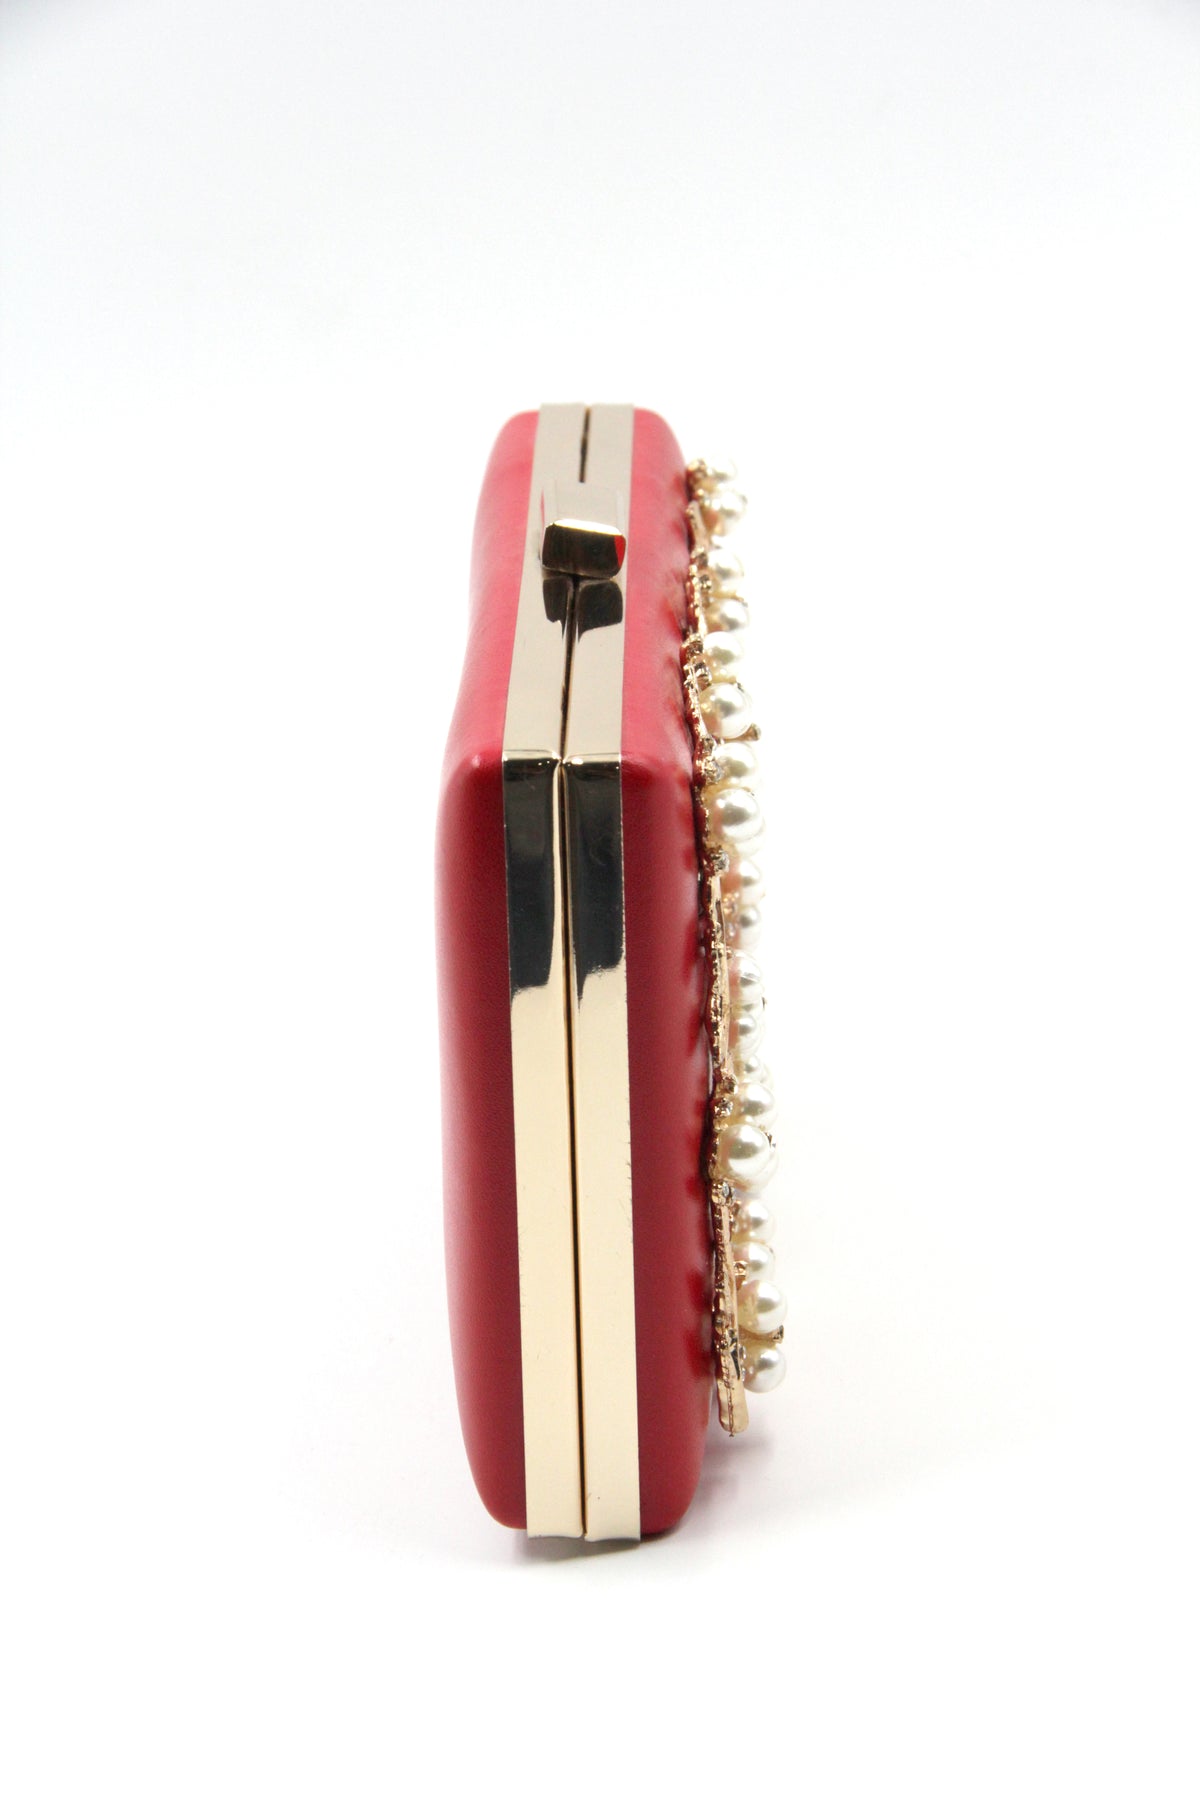 Rectangle Box Shaped Red Clutch with Gold and Pearls